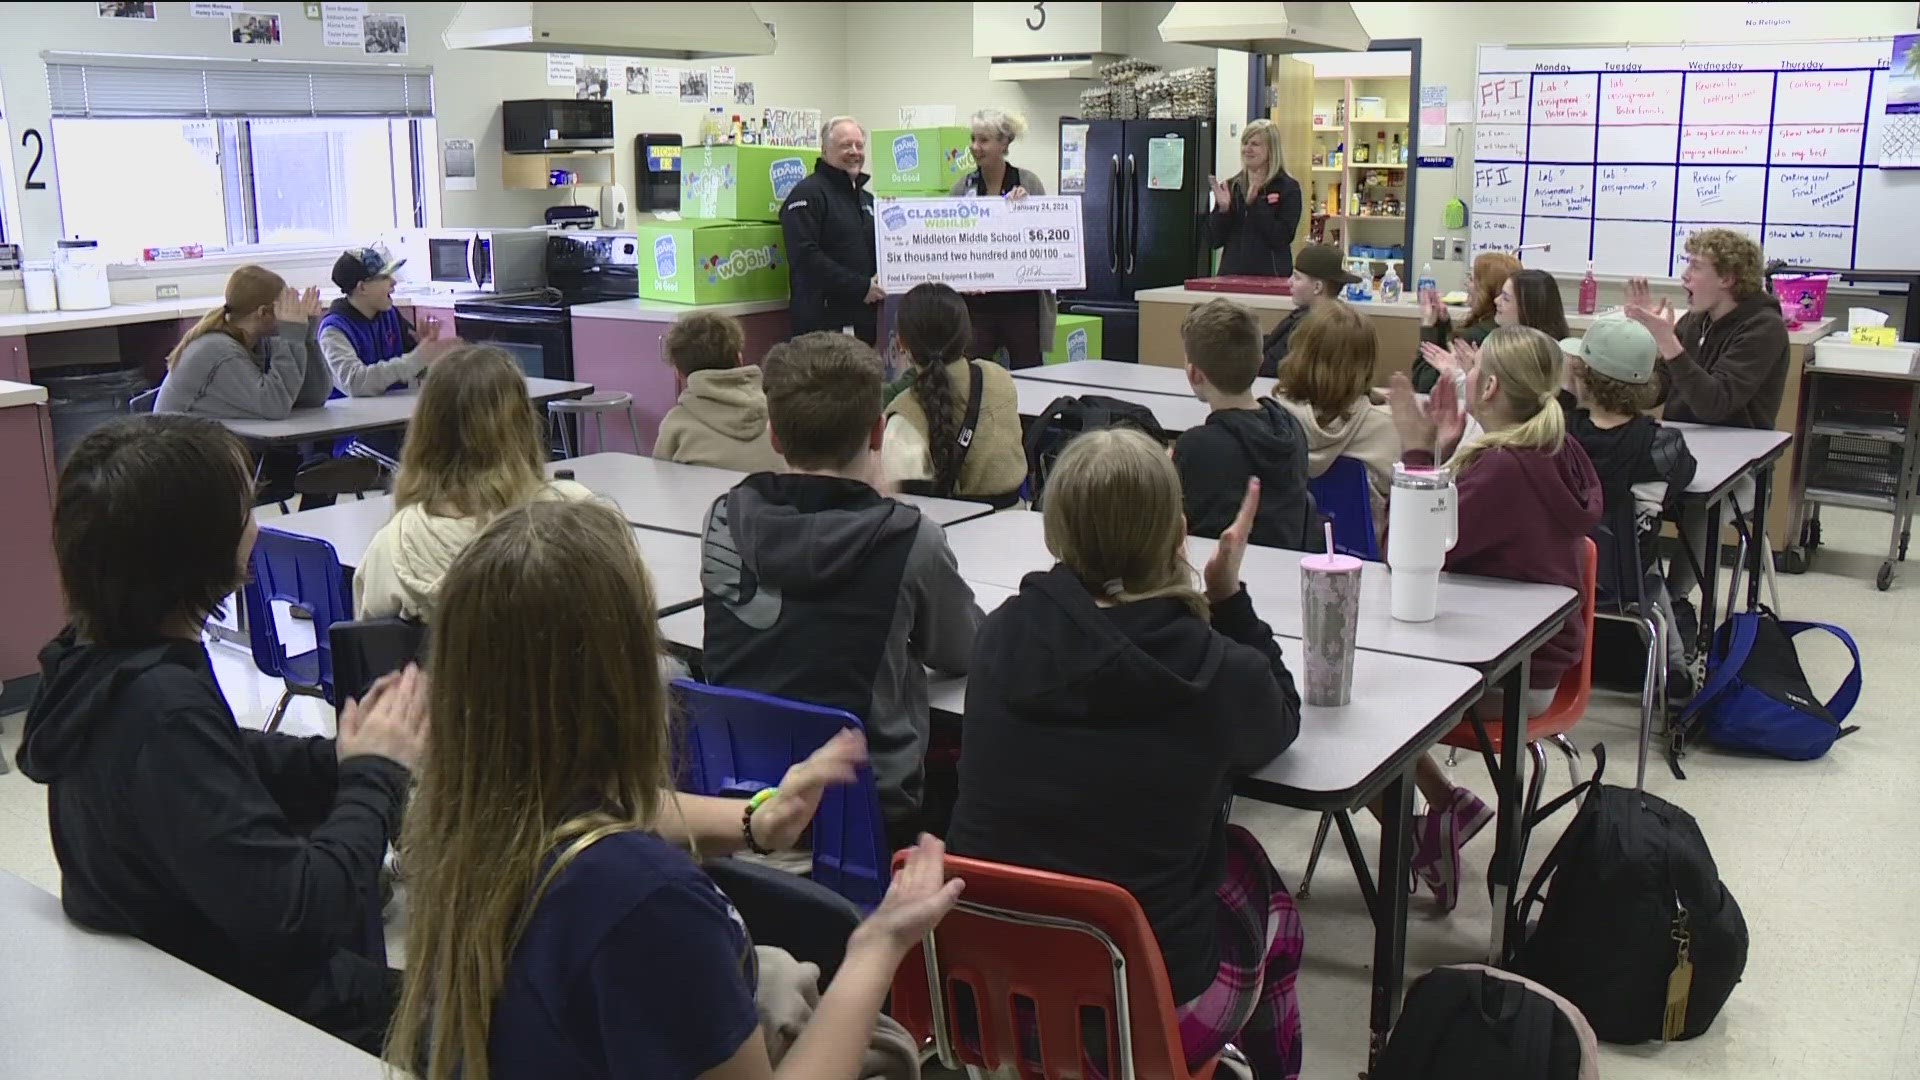 The $6,200 worth of new equipment was delivered to help Anne Kinley's seventh and eighth grade Culinary Arts and Finance classes at Middleton Middle School.